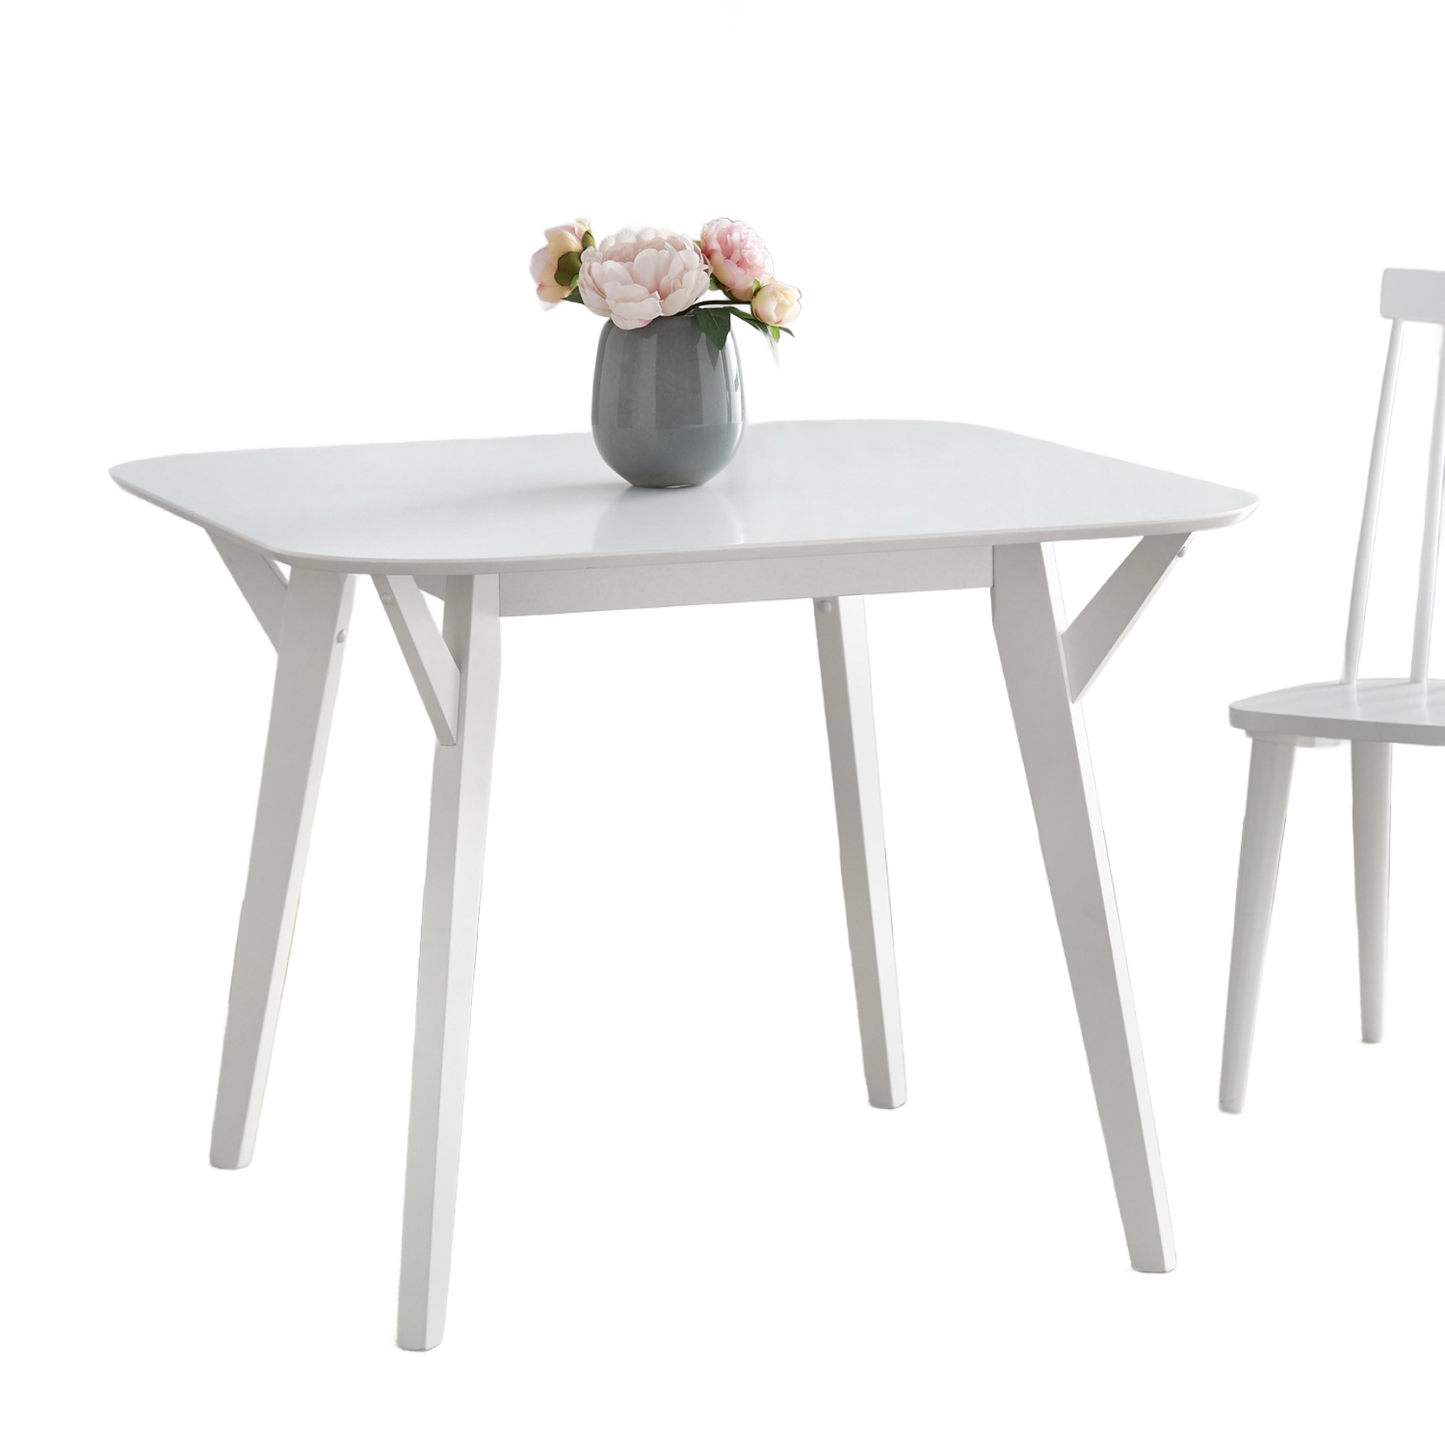 angelo:HOME Dining Set - Annabelle 3-Piece (White Table, Summer Floral Chairs)